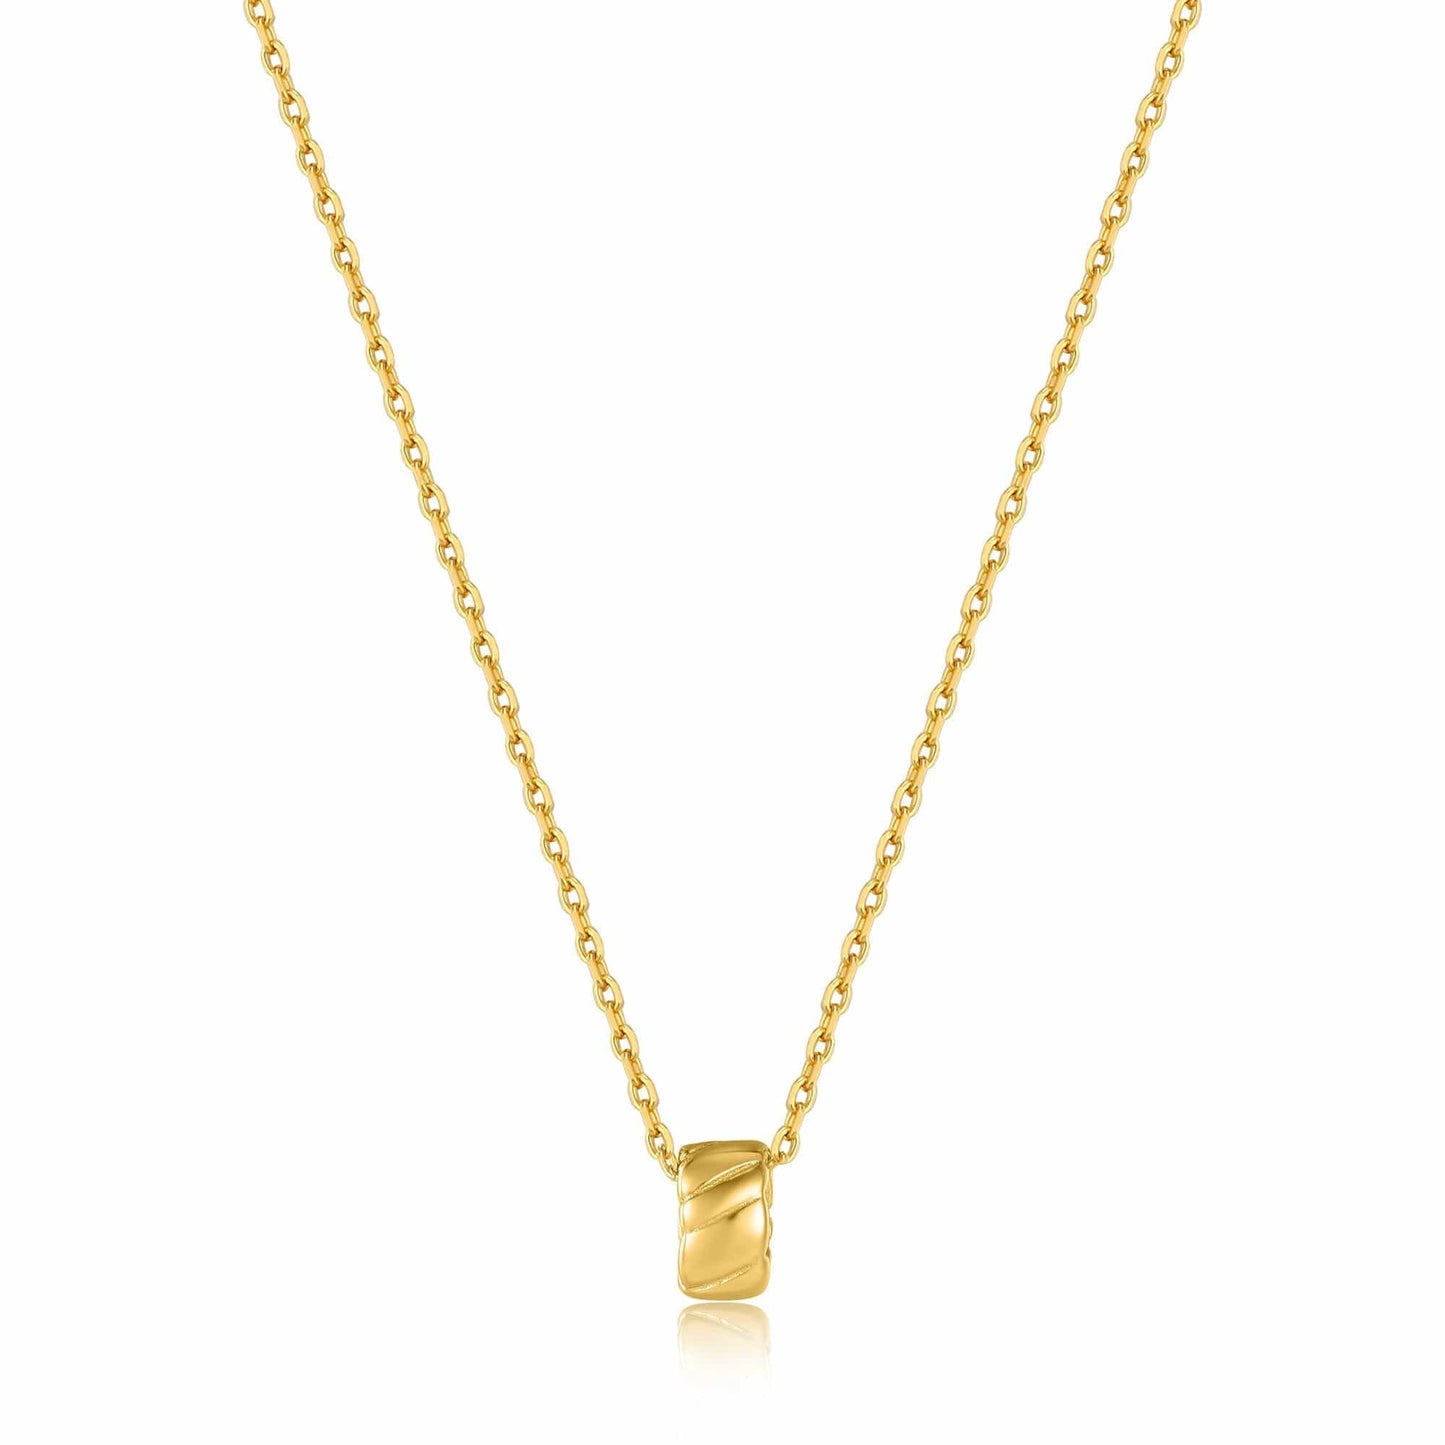 NKL-GPL Gold Smooth Twist Pendant Necklace